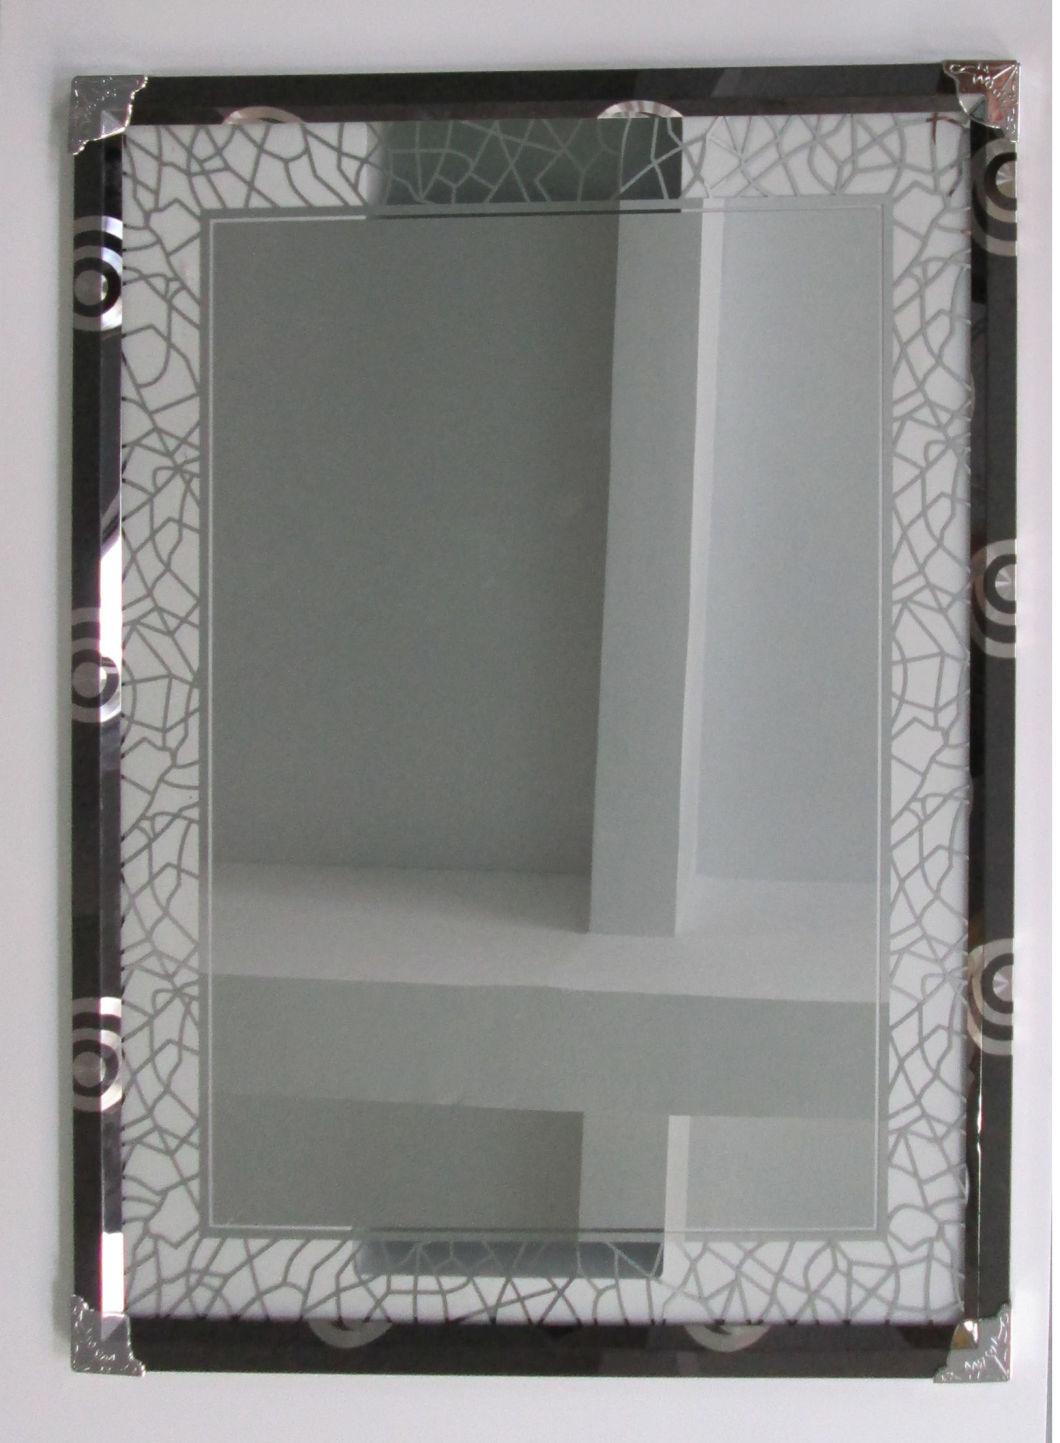 Stainless Steel Framed Silver Wall LED Laminated Bathroom Glass Mirror